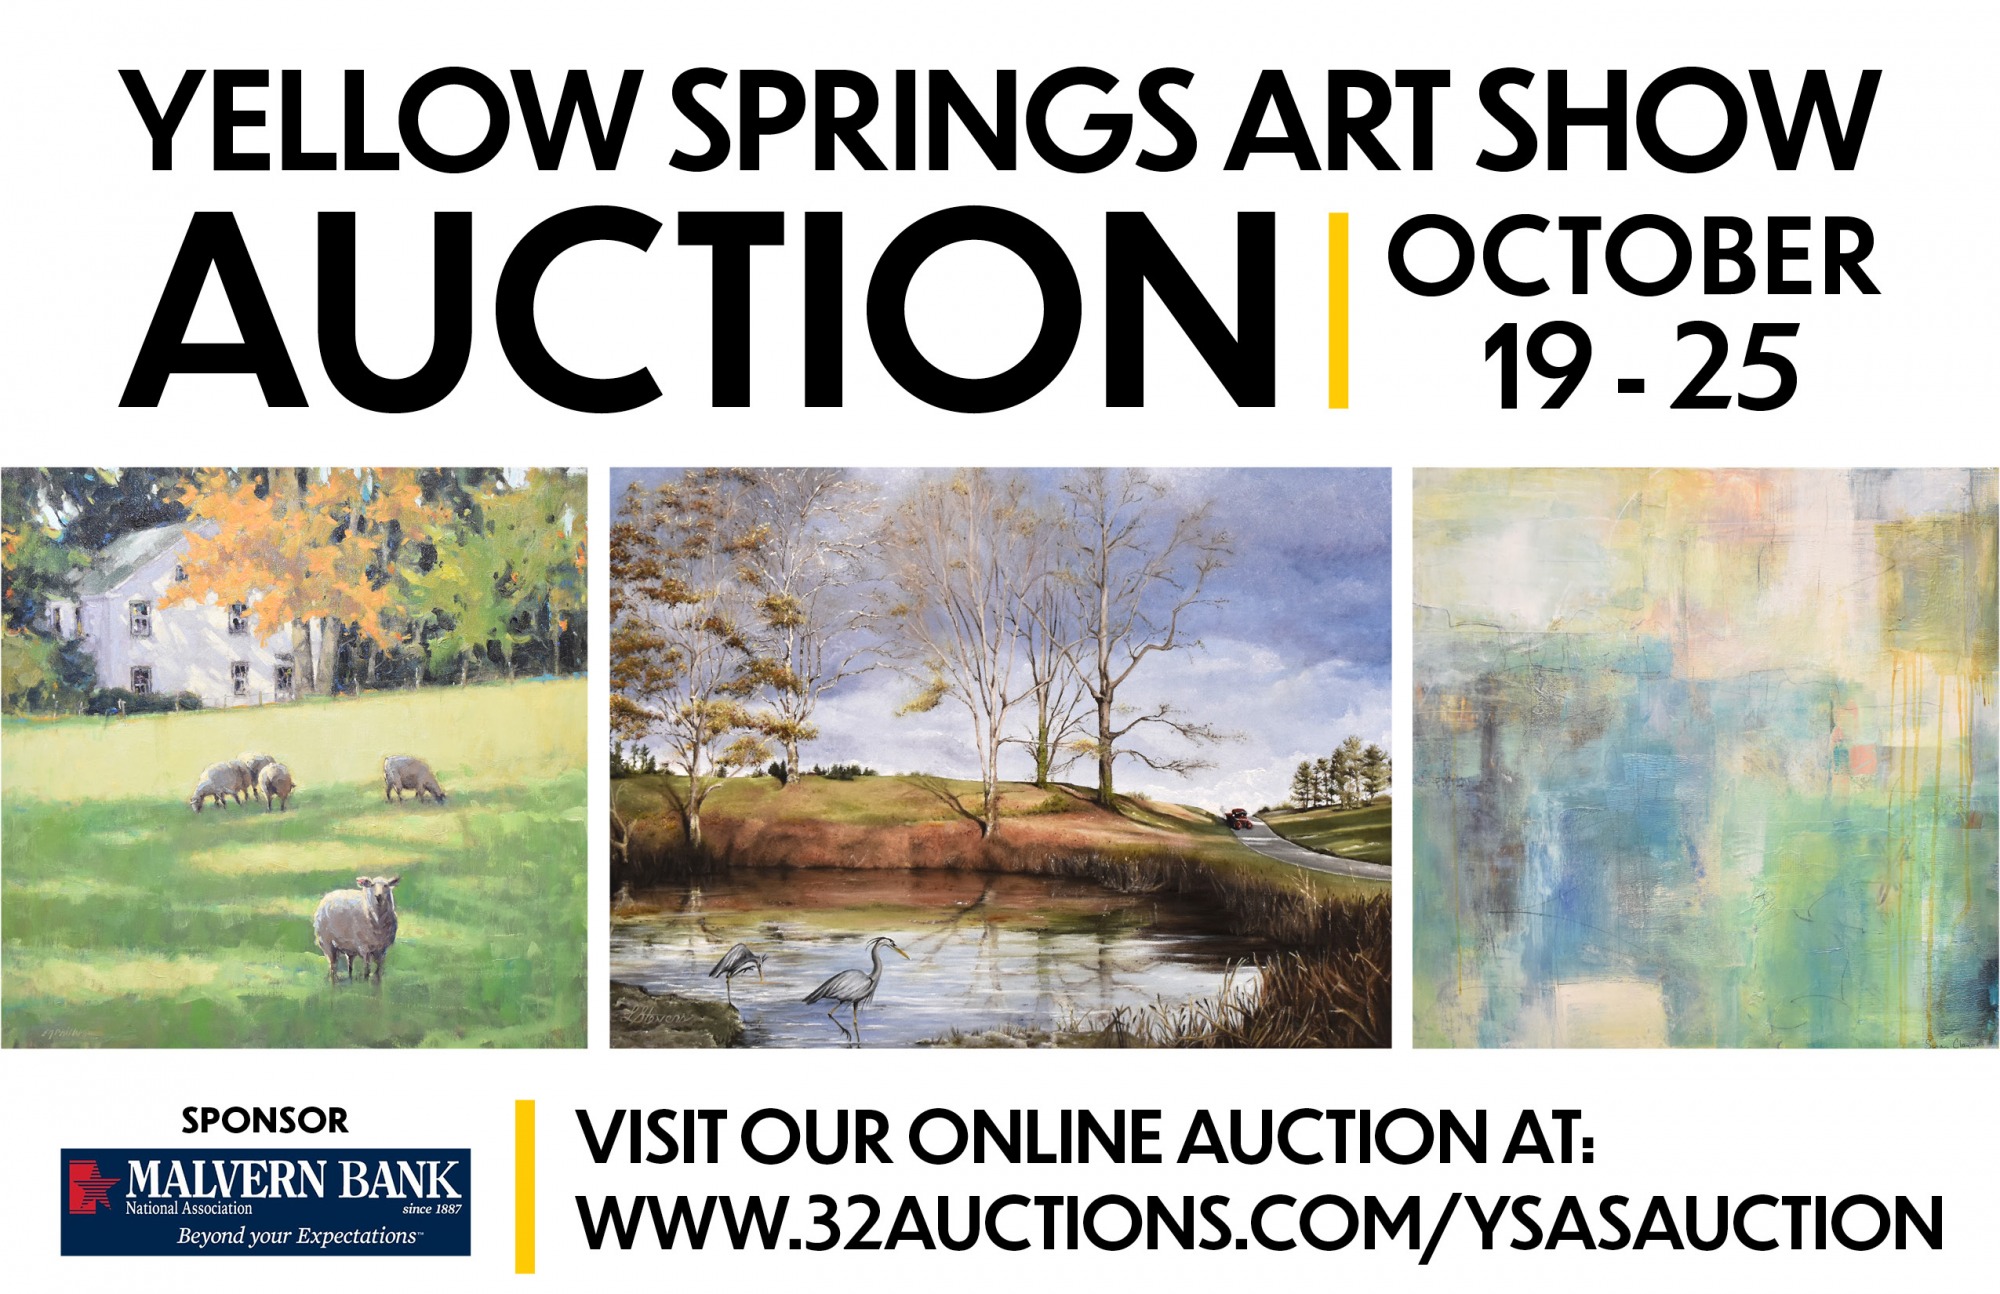 Yellow Springs Art Show Auction